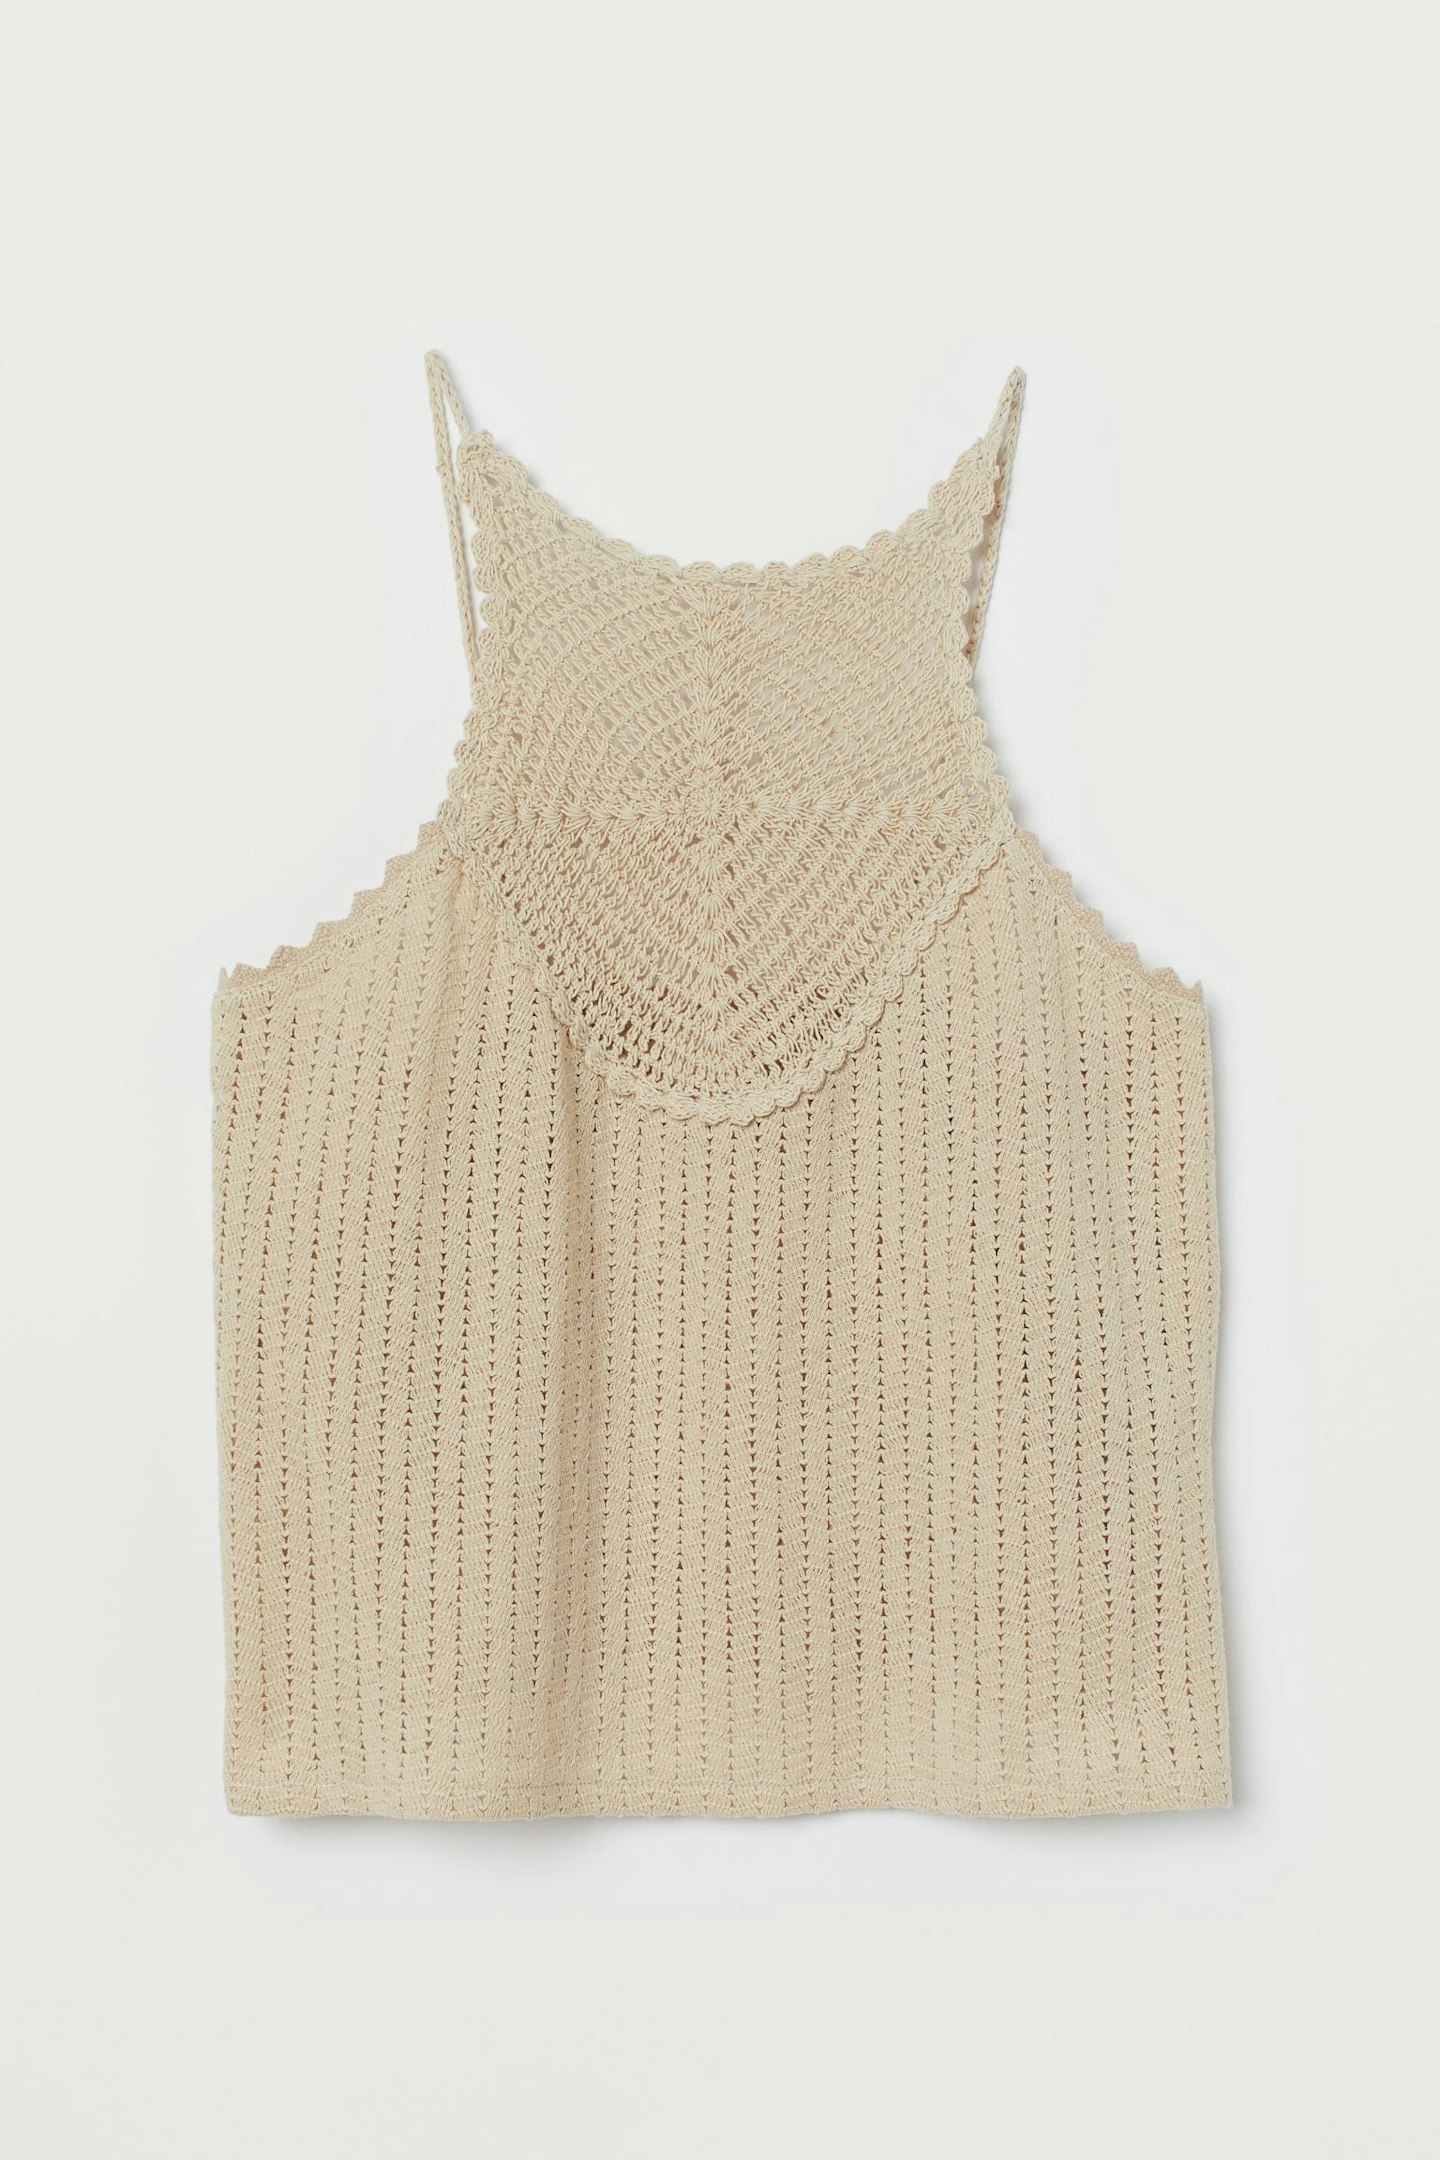 H&M, Crocheted Top, WAS £17.99 NOW £12